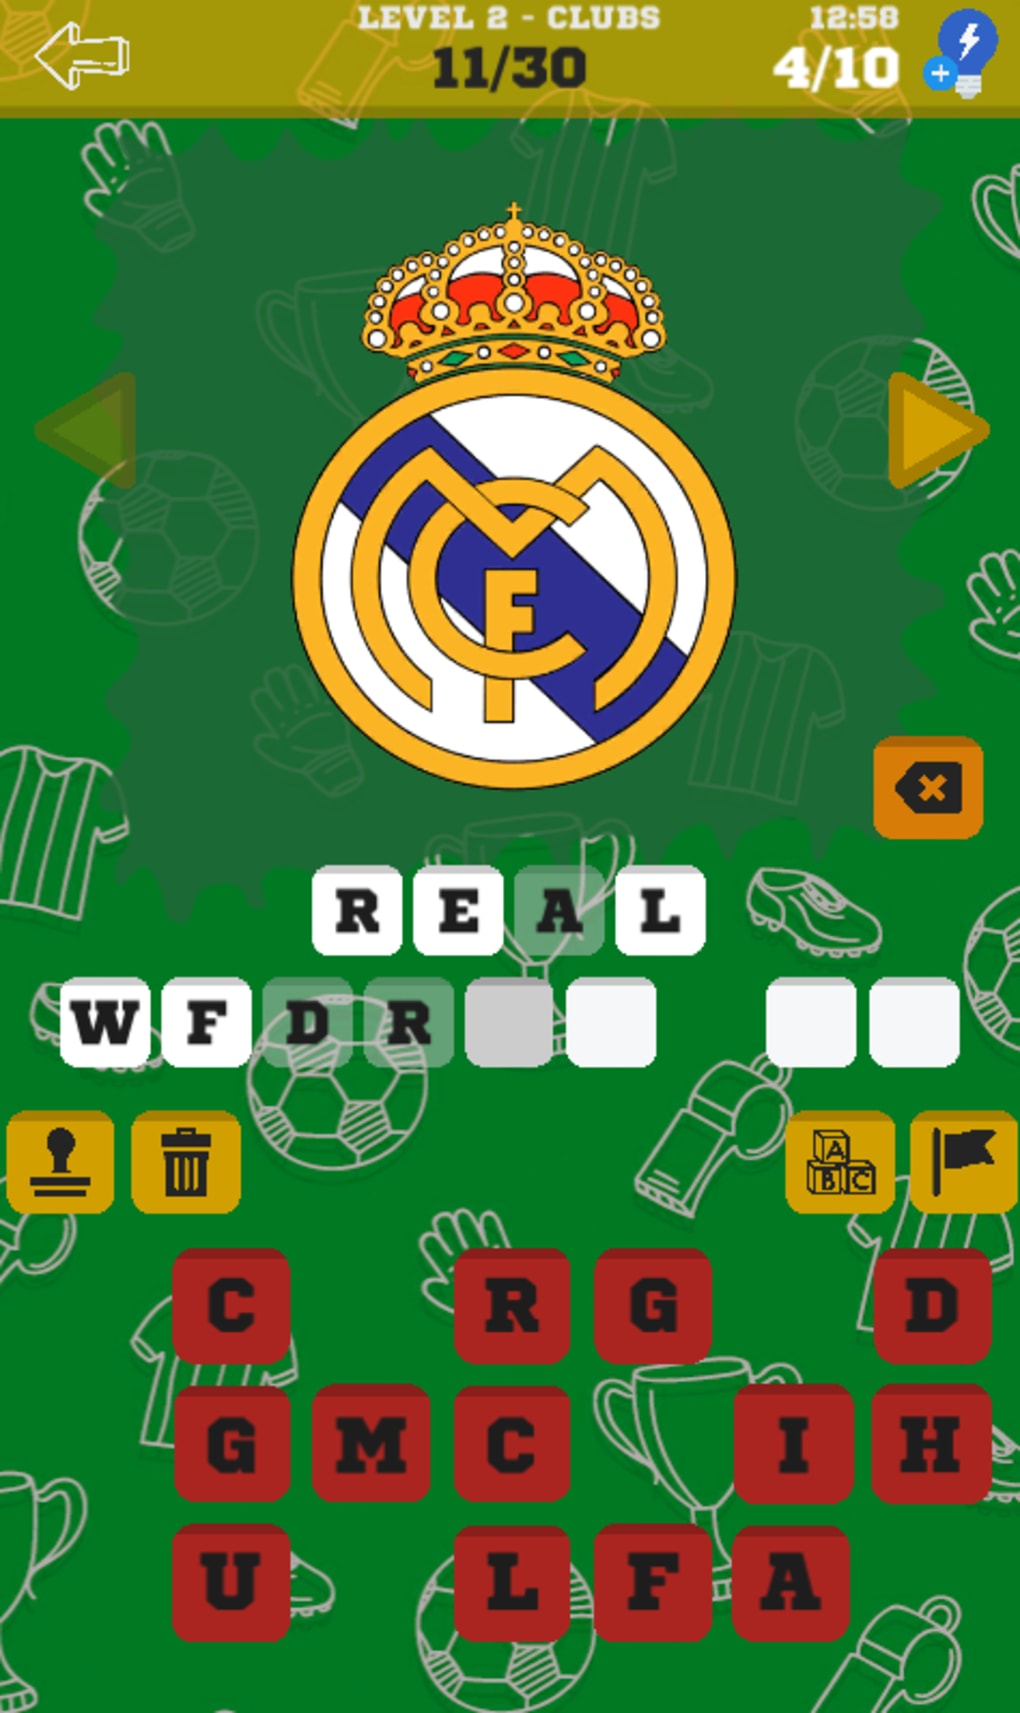 Football Club Logo Quiz APK for Android Download